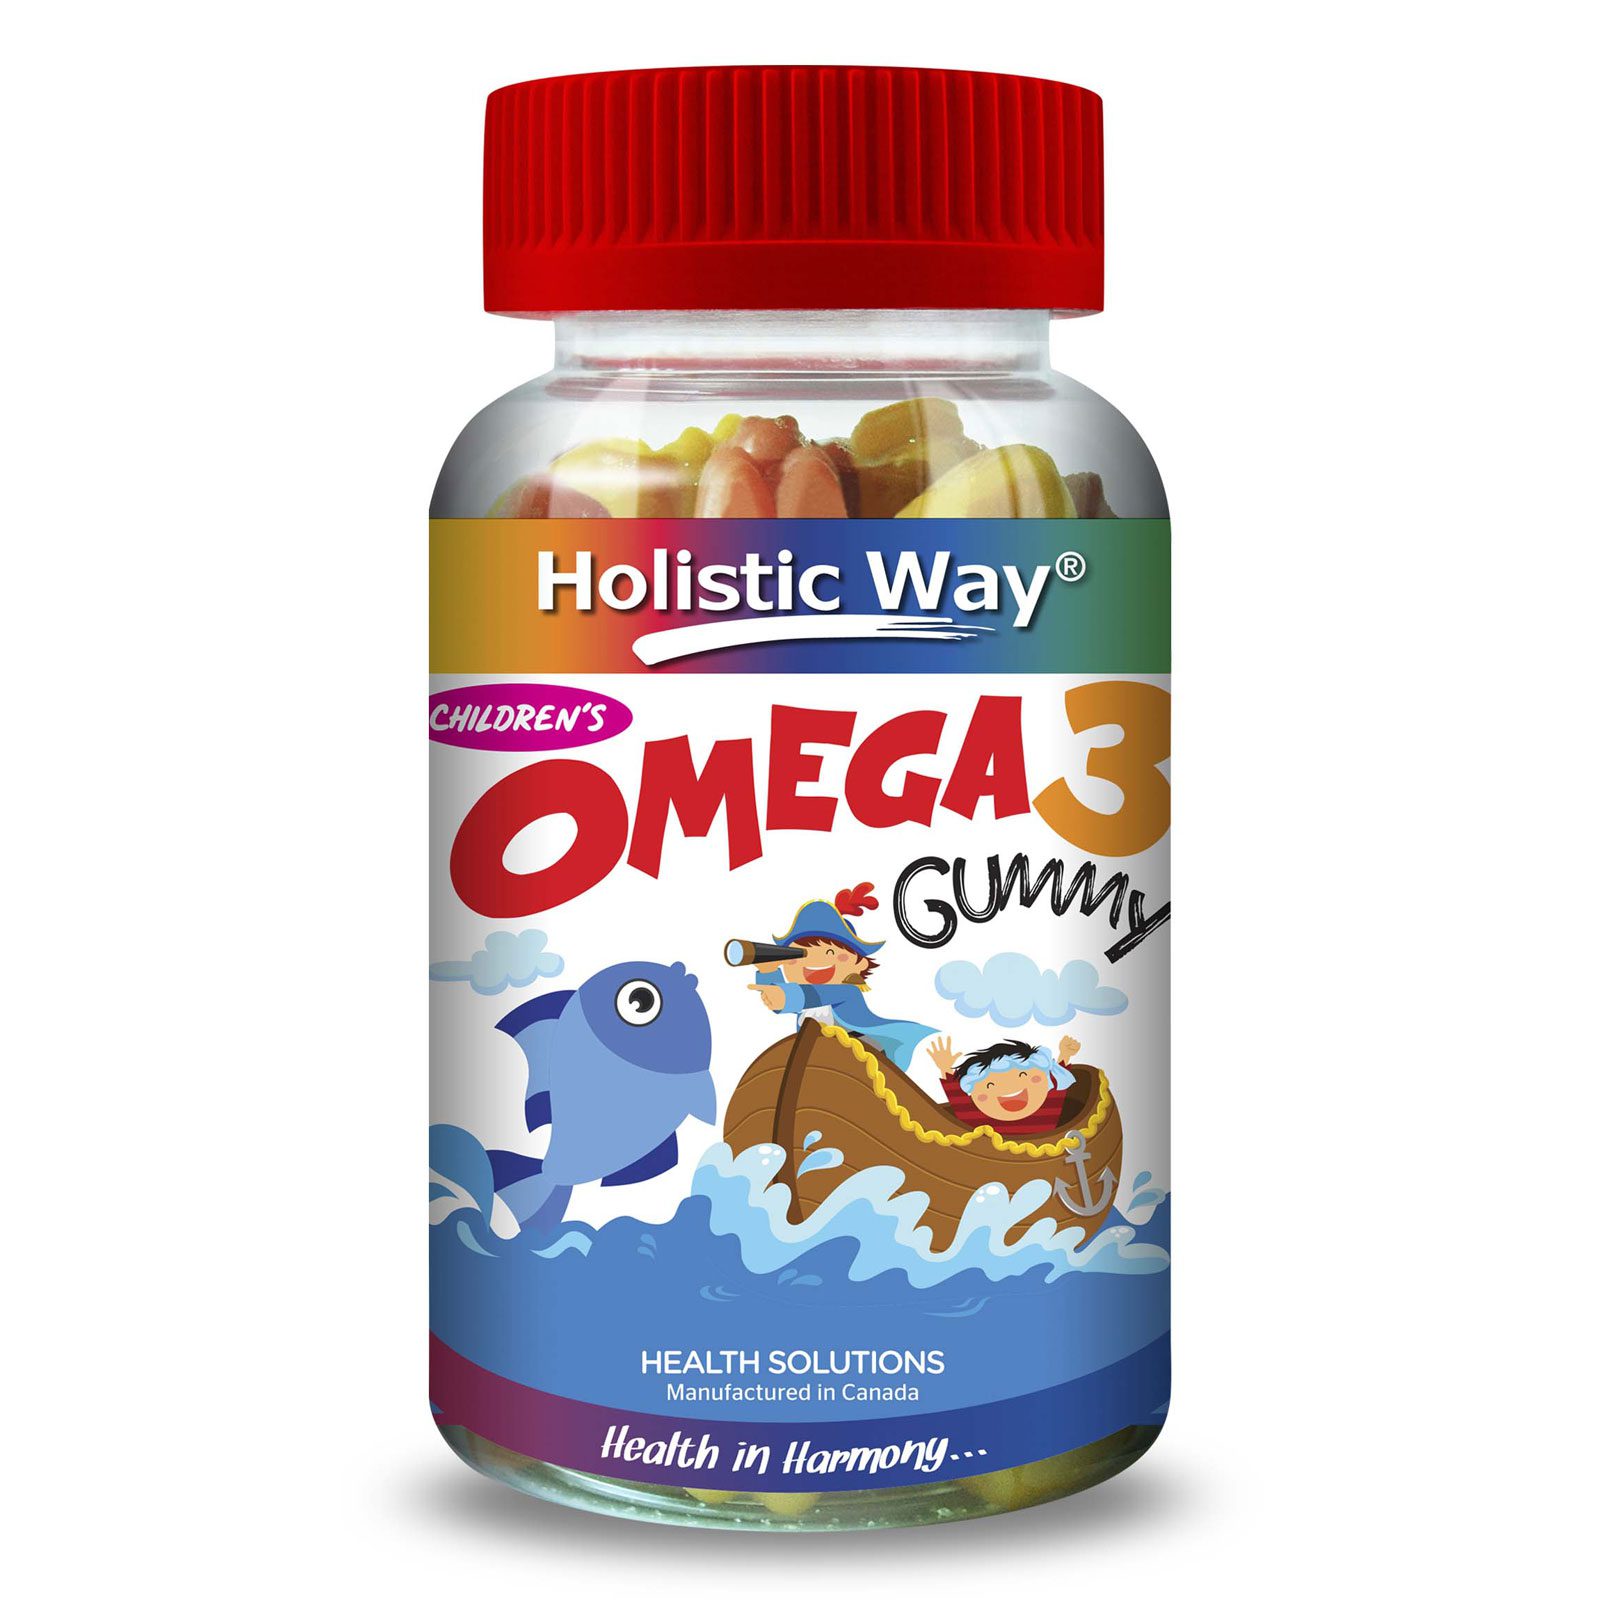 Holistic Way Children's Omega 3 Gummy (90 Gummies) Review & Price 2020 |  Insider Mall Singapore